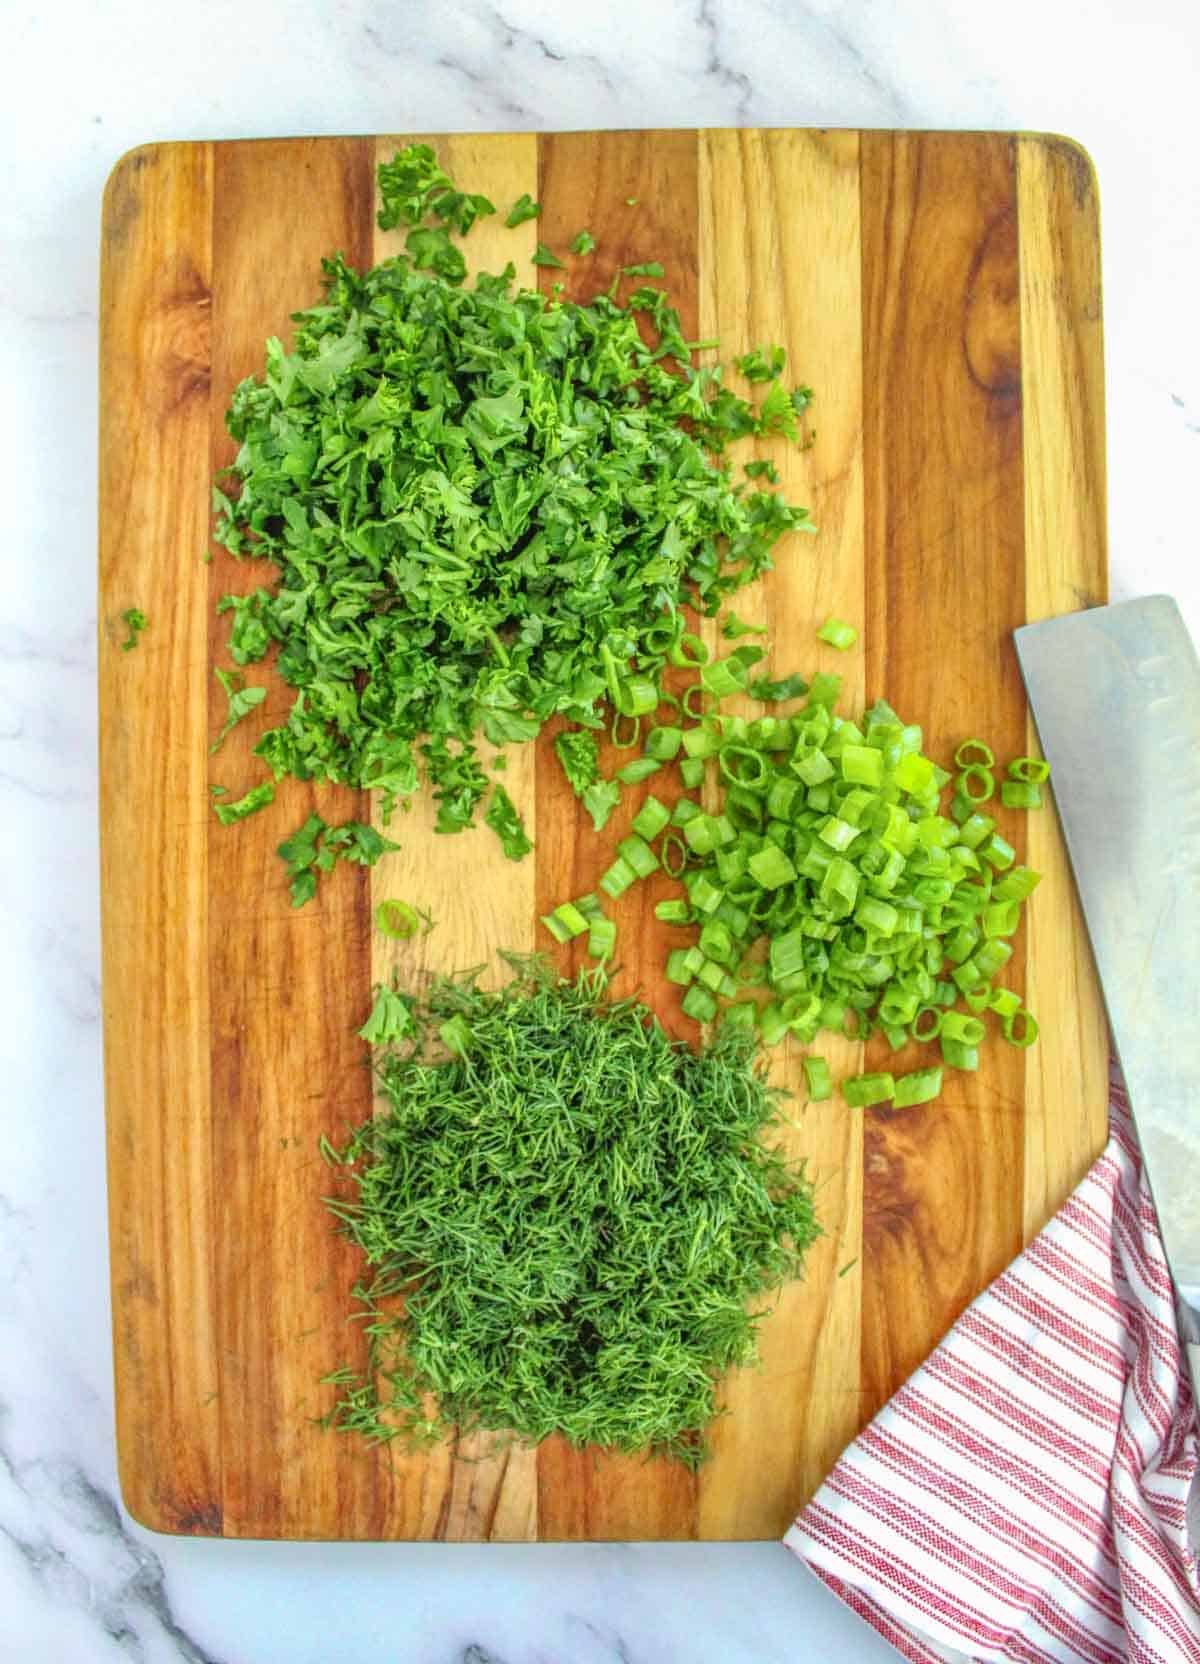 Chopped chives on a cutting board with a knife.